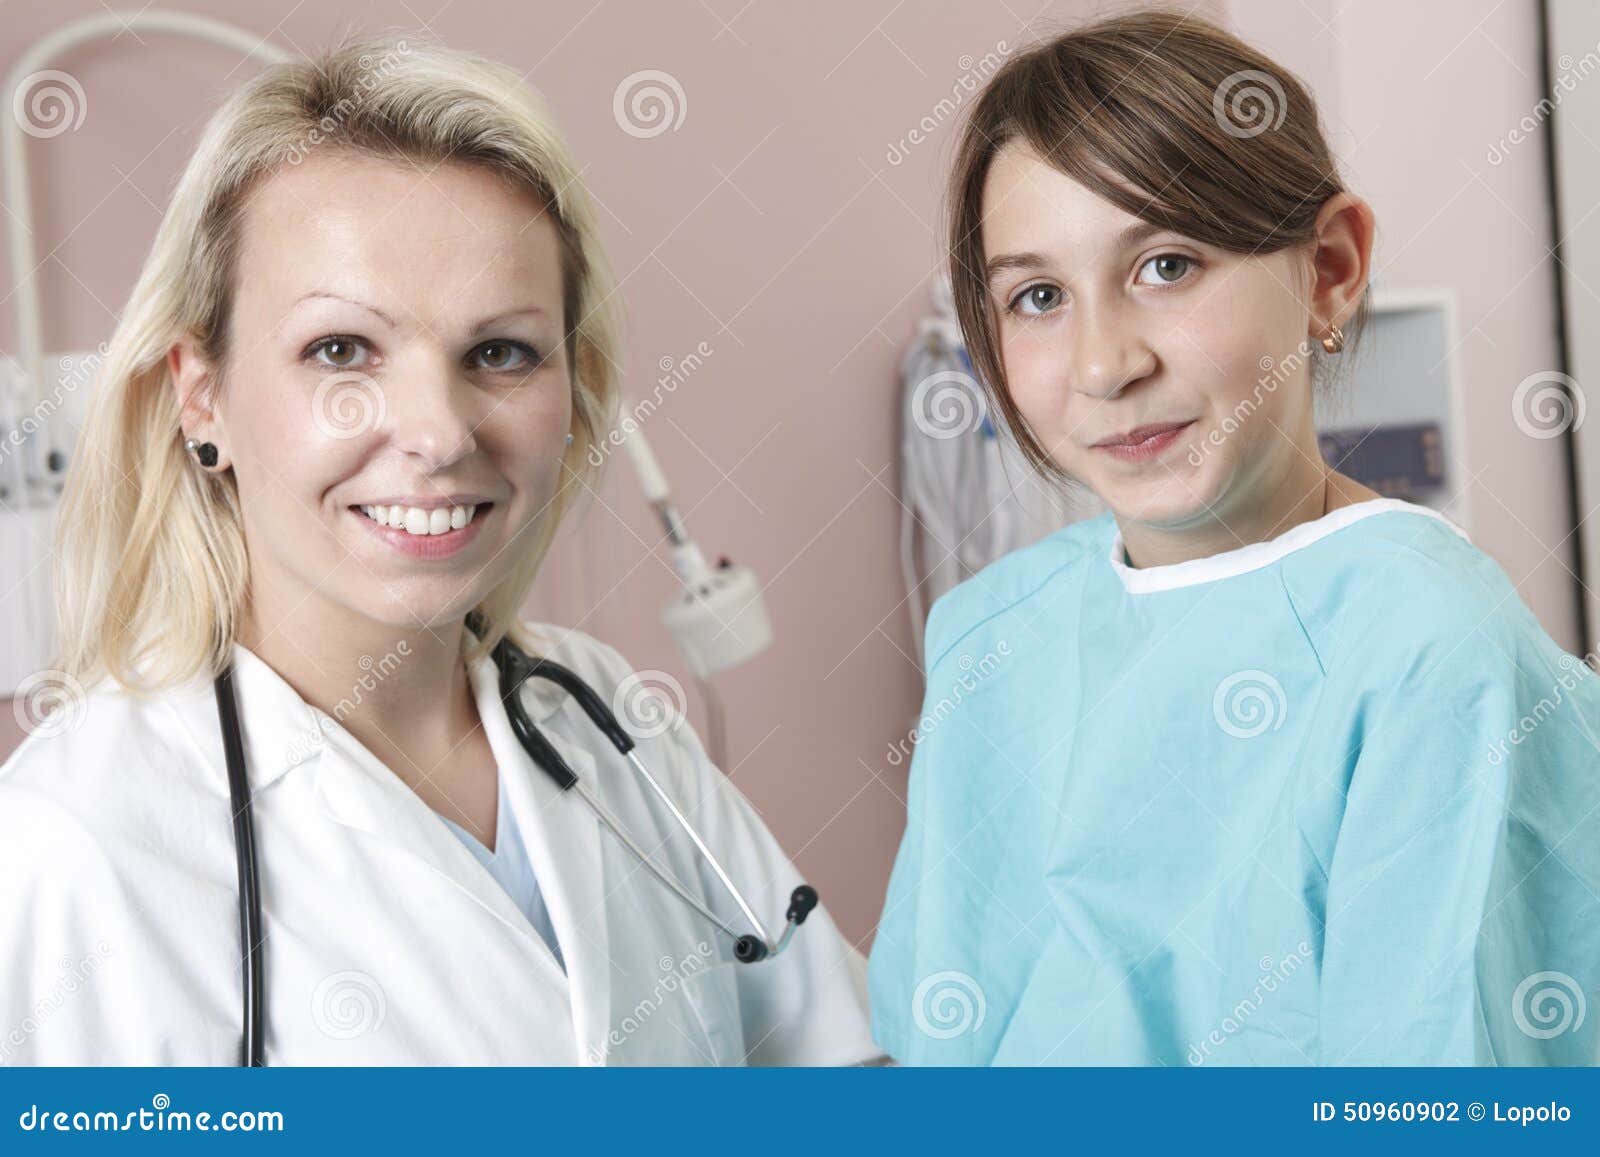 Little Girl And The Doctor For A Checkup Examined Stock 